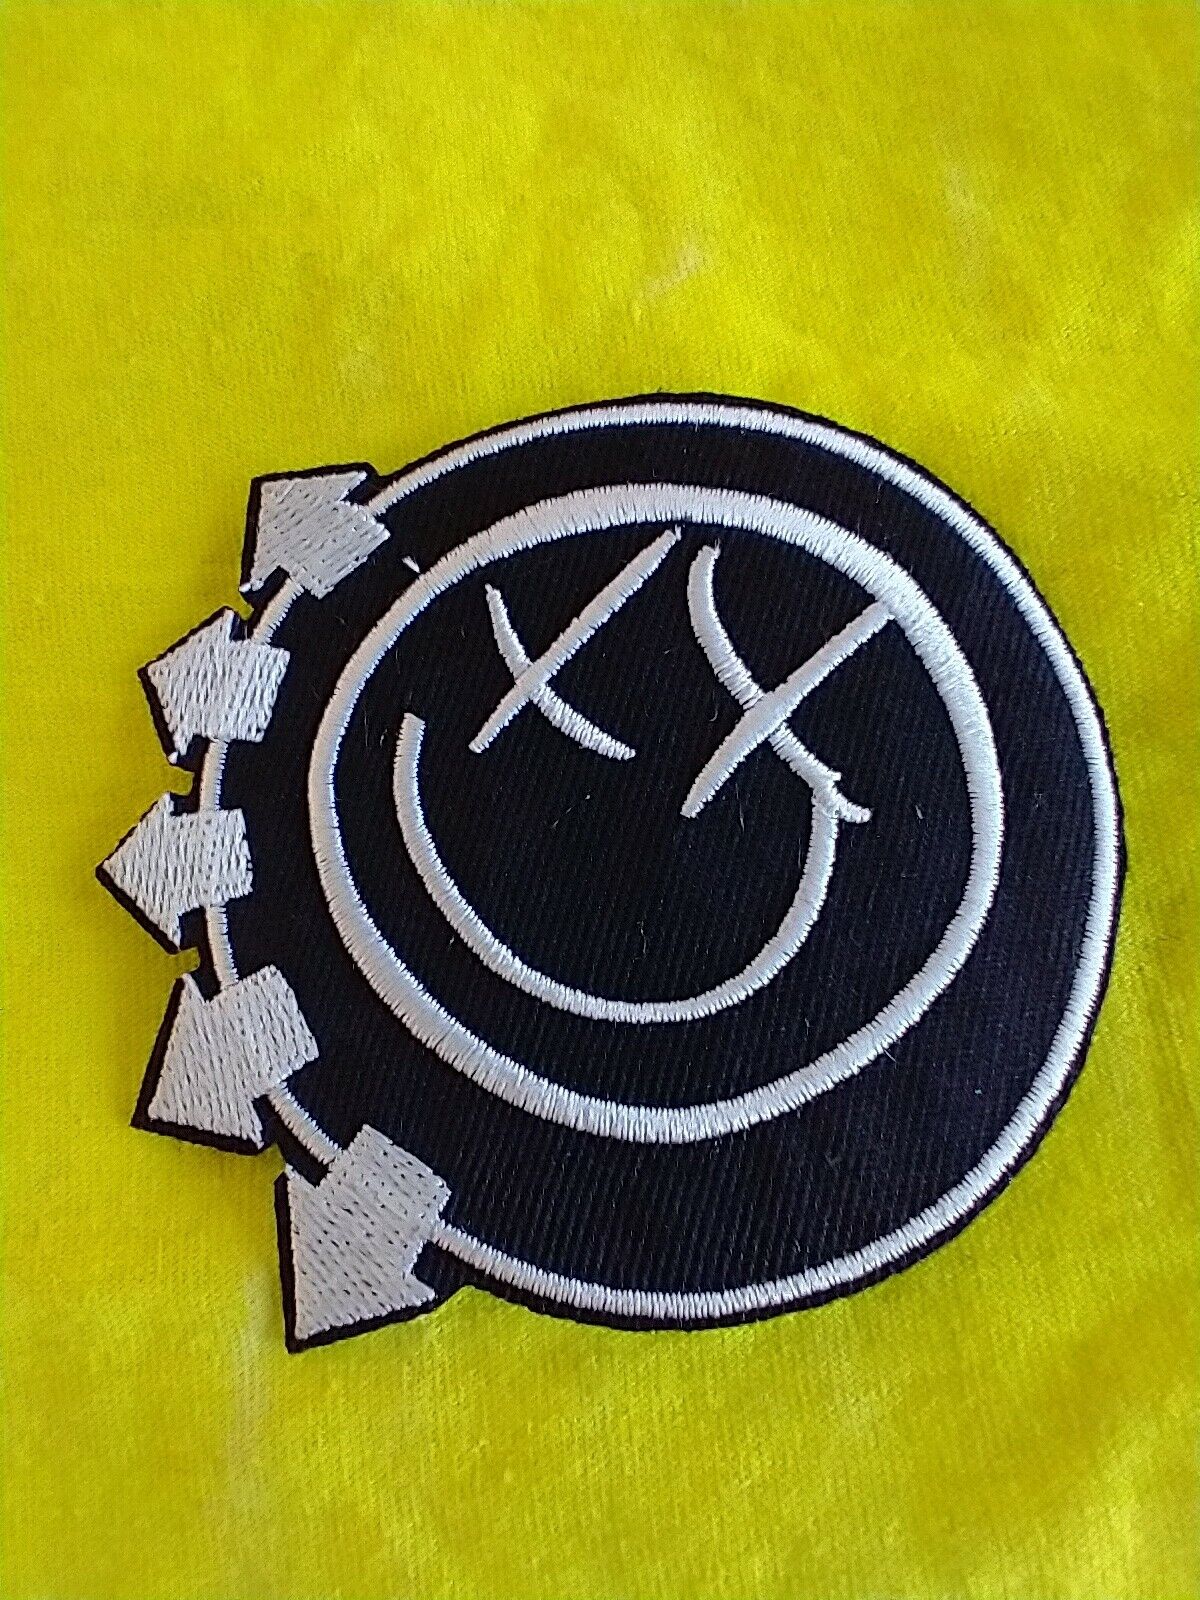 Blink - 182 Smile 3.25 X 2.75 Inch Iron On Patch